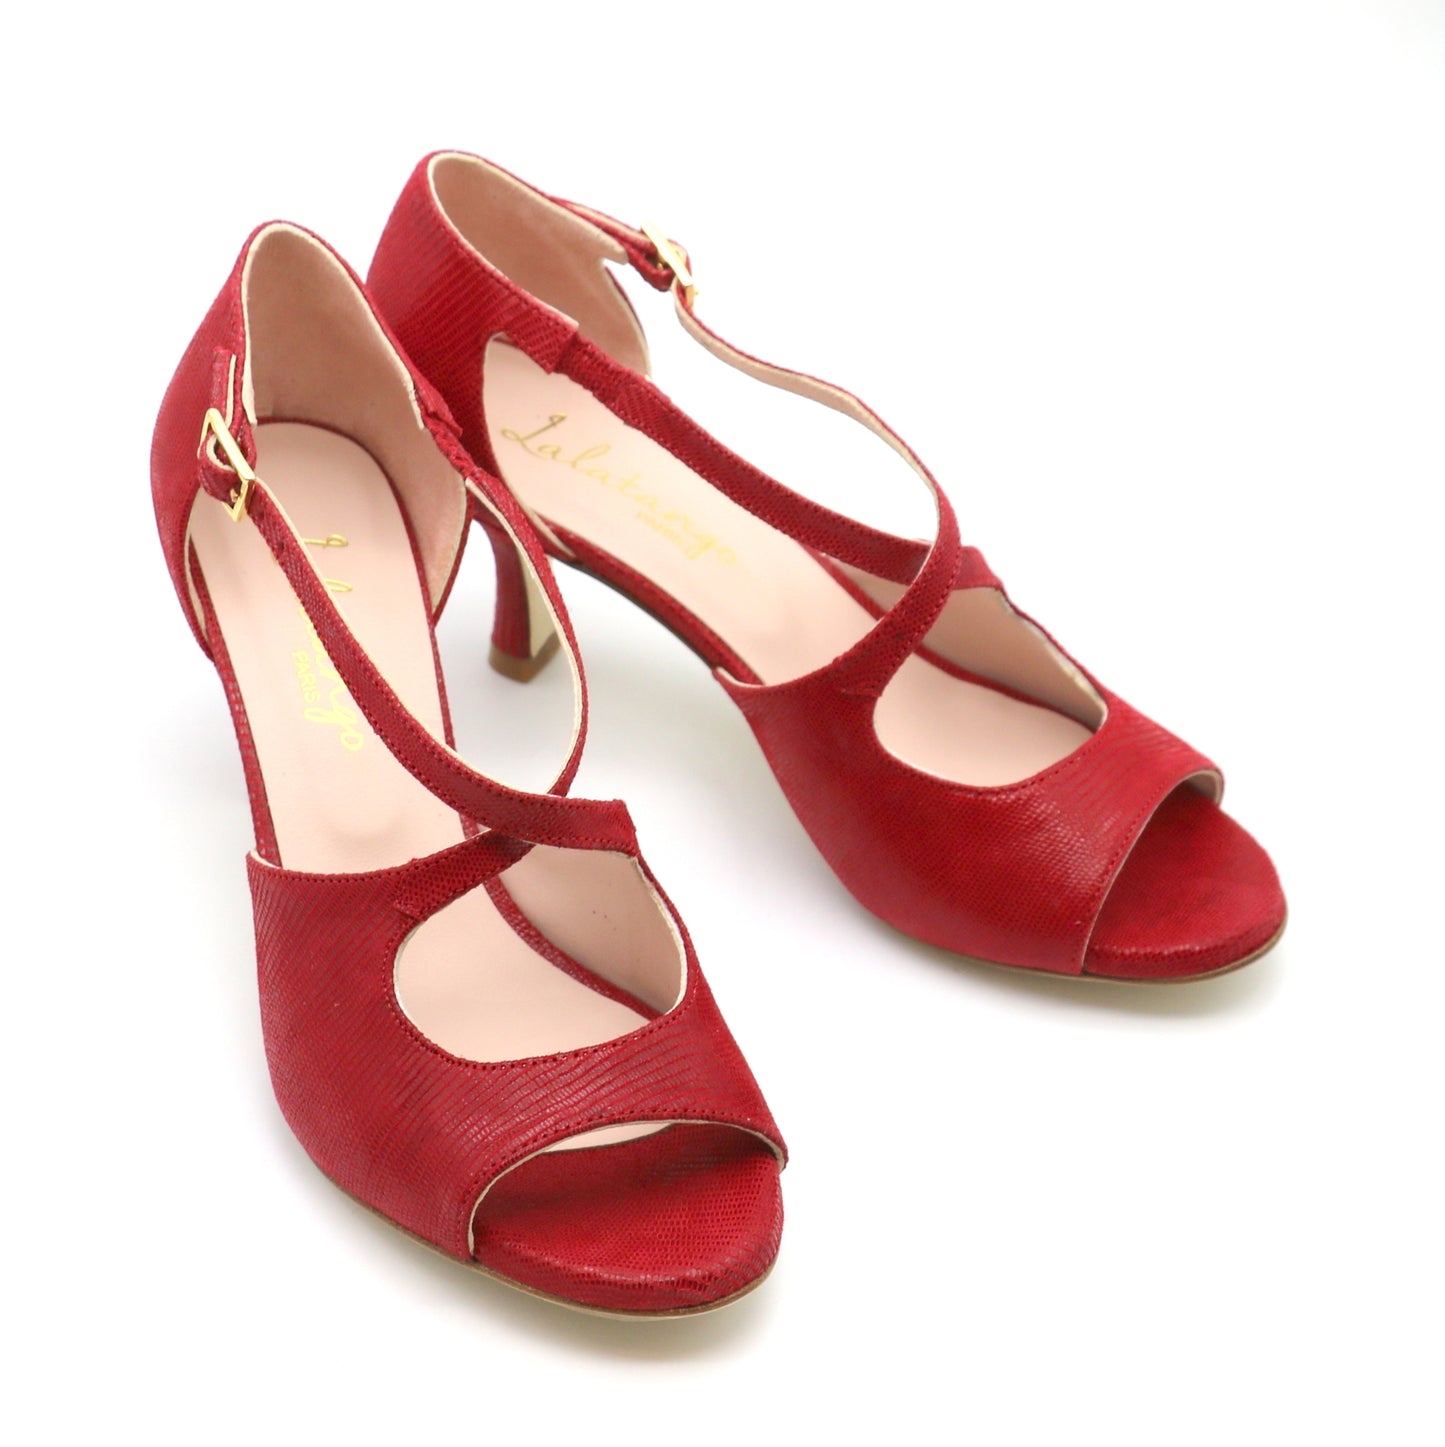 Croisé red leather snake style heels 6cm